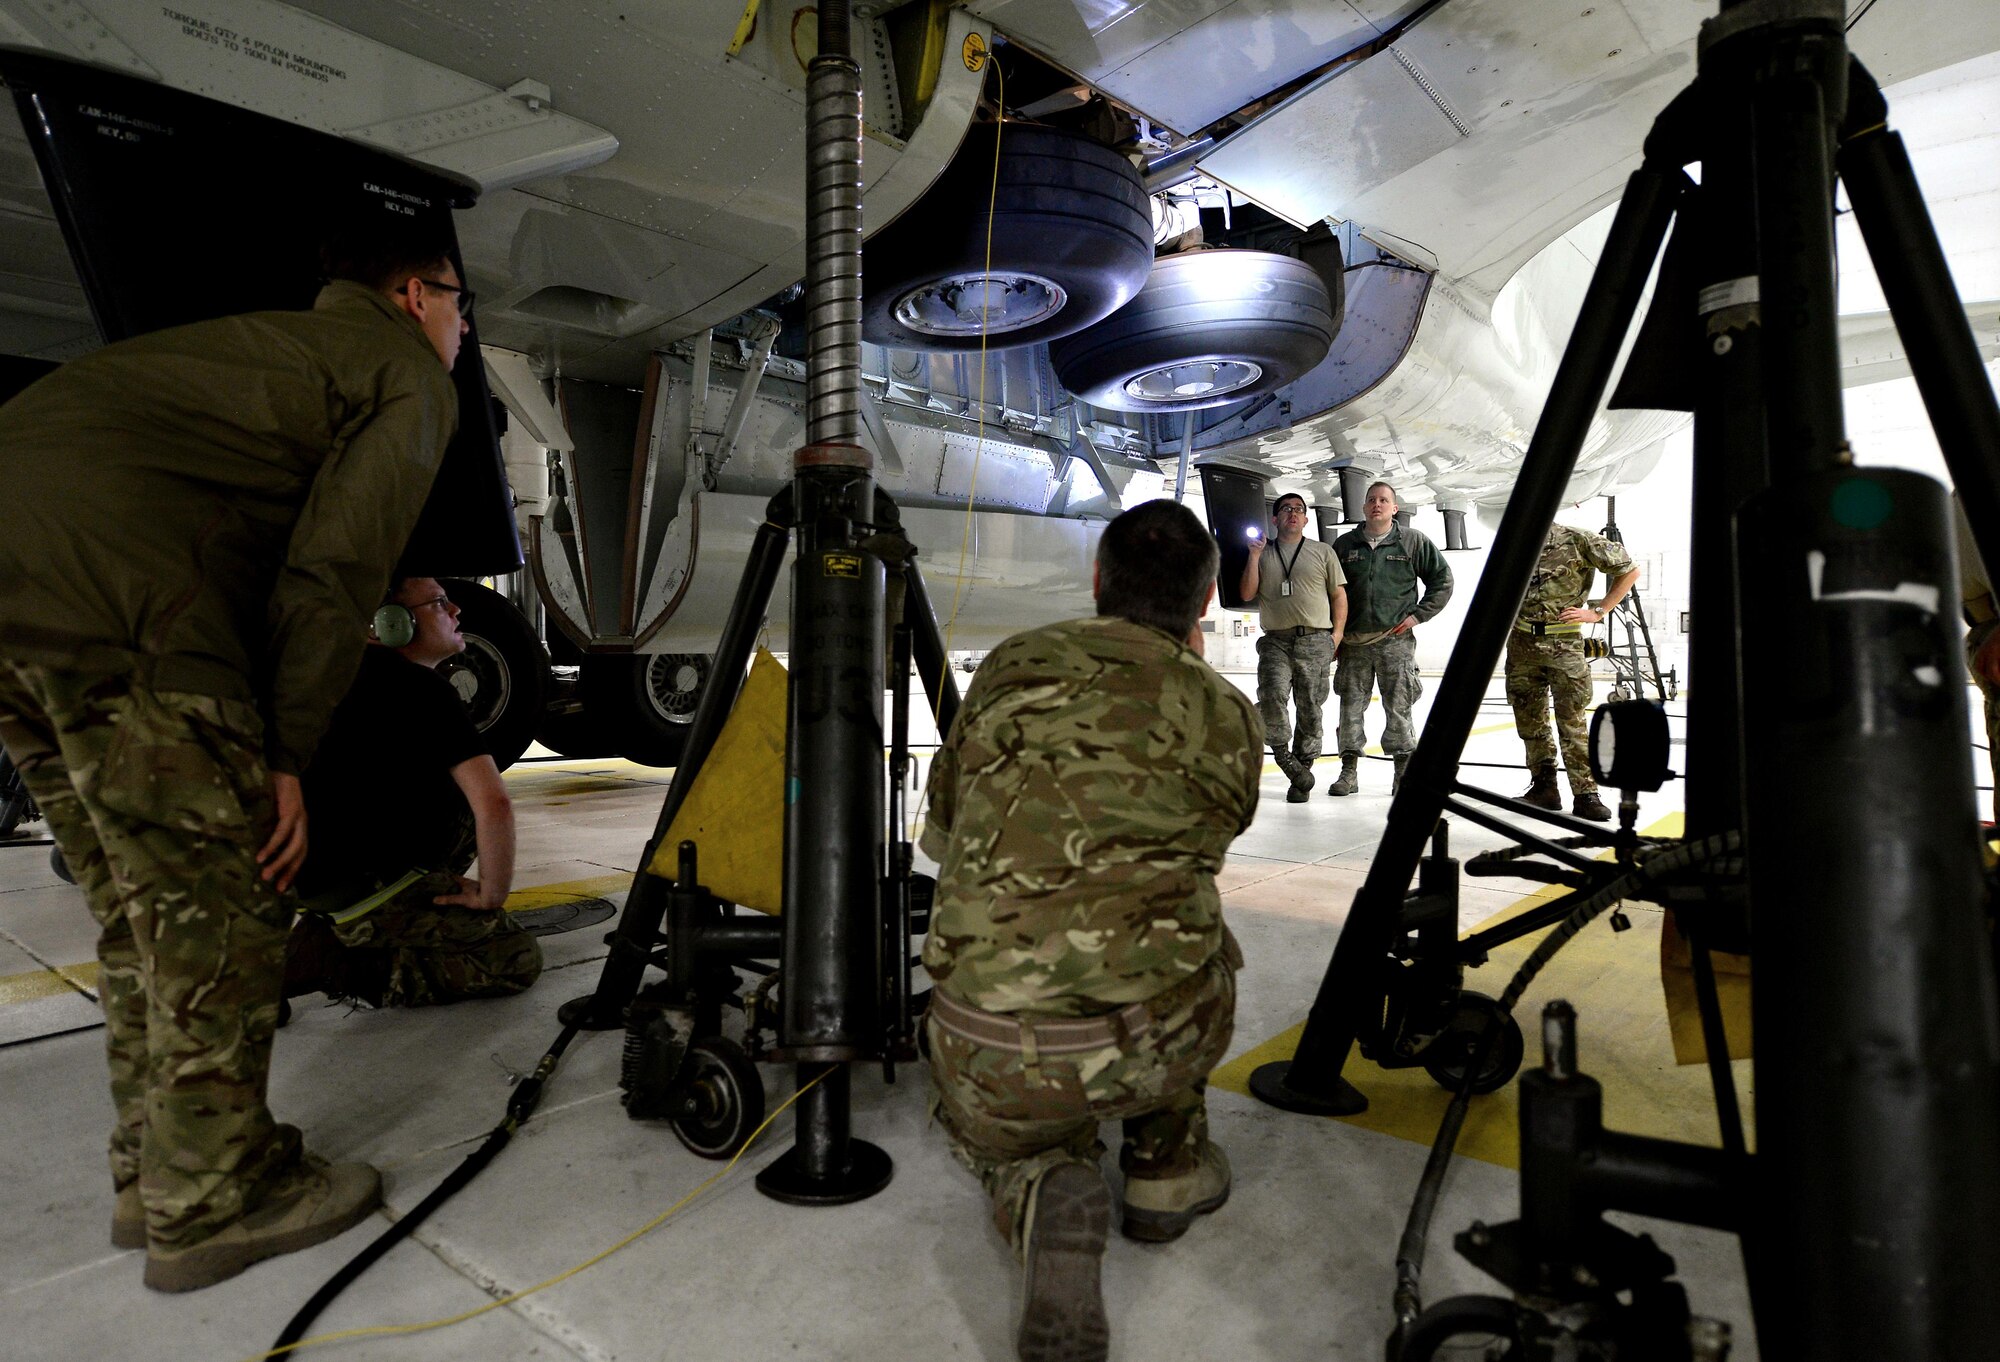 Royal Air Force 51 Squadron and 55th Maintenance Squadron maintenance personnel troubleshoot landing gear problems on a RAF RC-135 Airseeker suspended by 30 ton aircraft jacks inside a hangar at Offutt Air Force Base, Neb. Feb. 12. The aircraft diverted from Nellis Air Force Base to Offutt where it received maintenance assistance from the 55th MXG to correct a landing gear problem that occurred while participating in a joint exercise. (U.S. Air Force photo by Delanie Stafford)